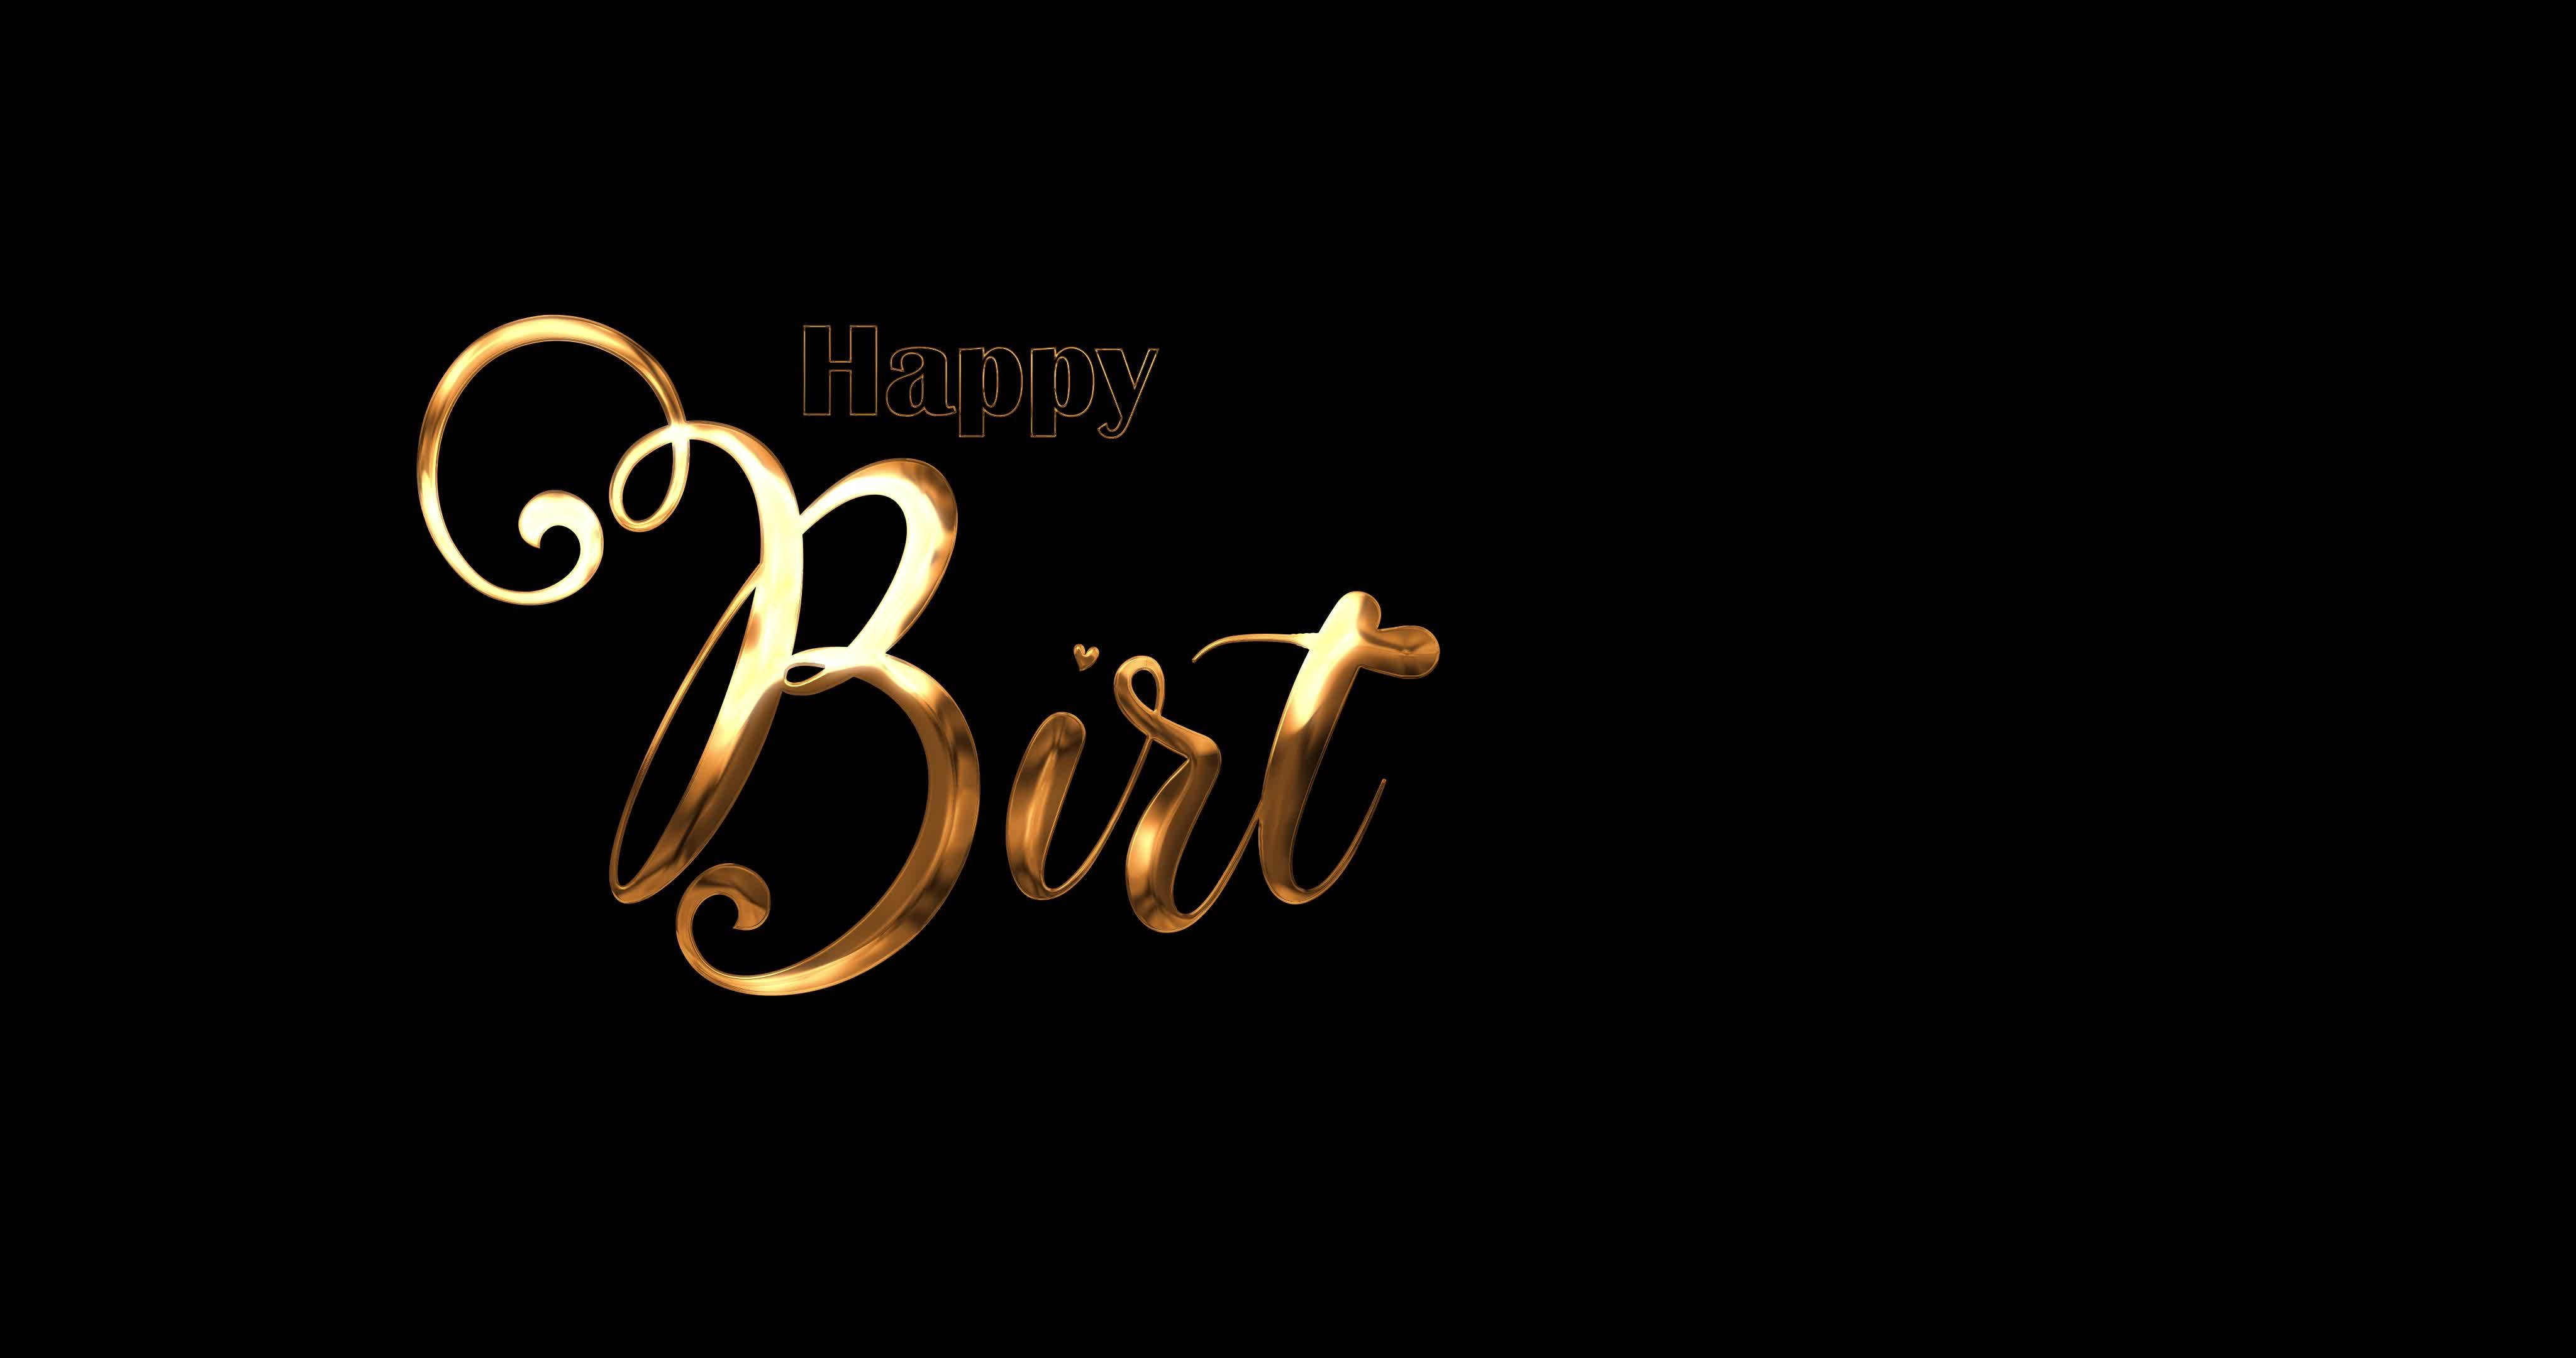 Animated Birthday Stock Video Footage for Free Download